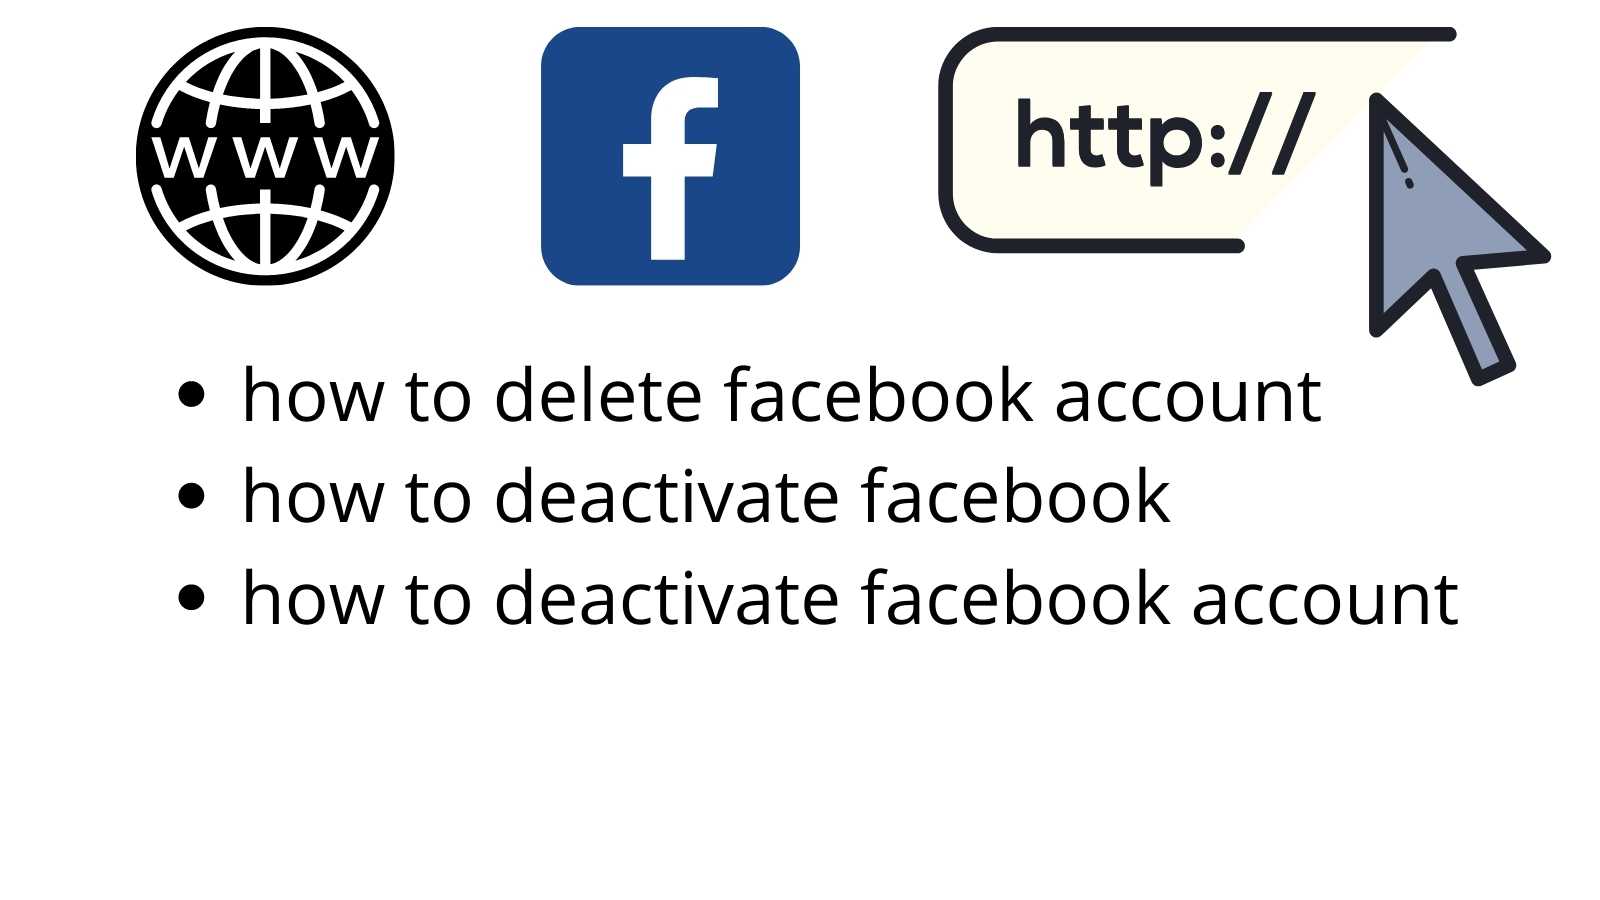 How to delete facebook account or how to deactivate facebook account